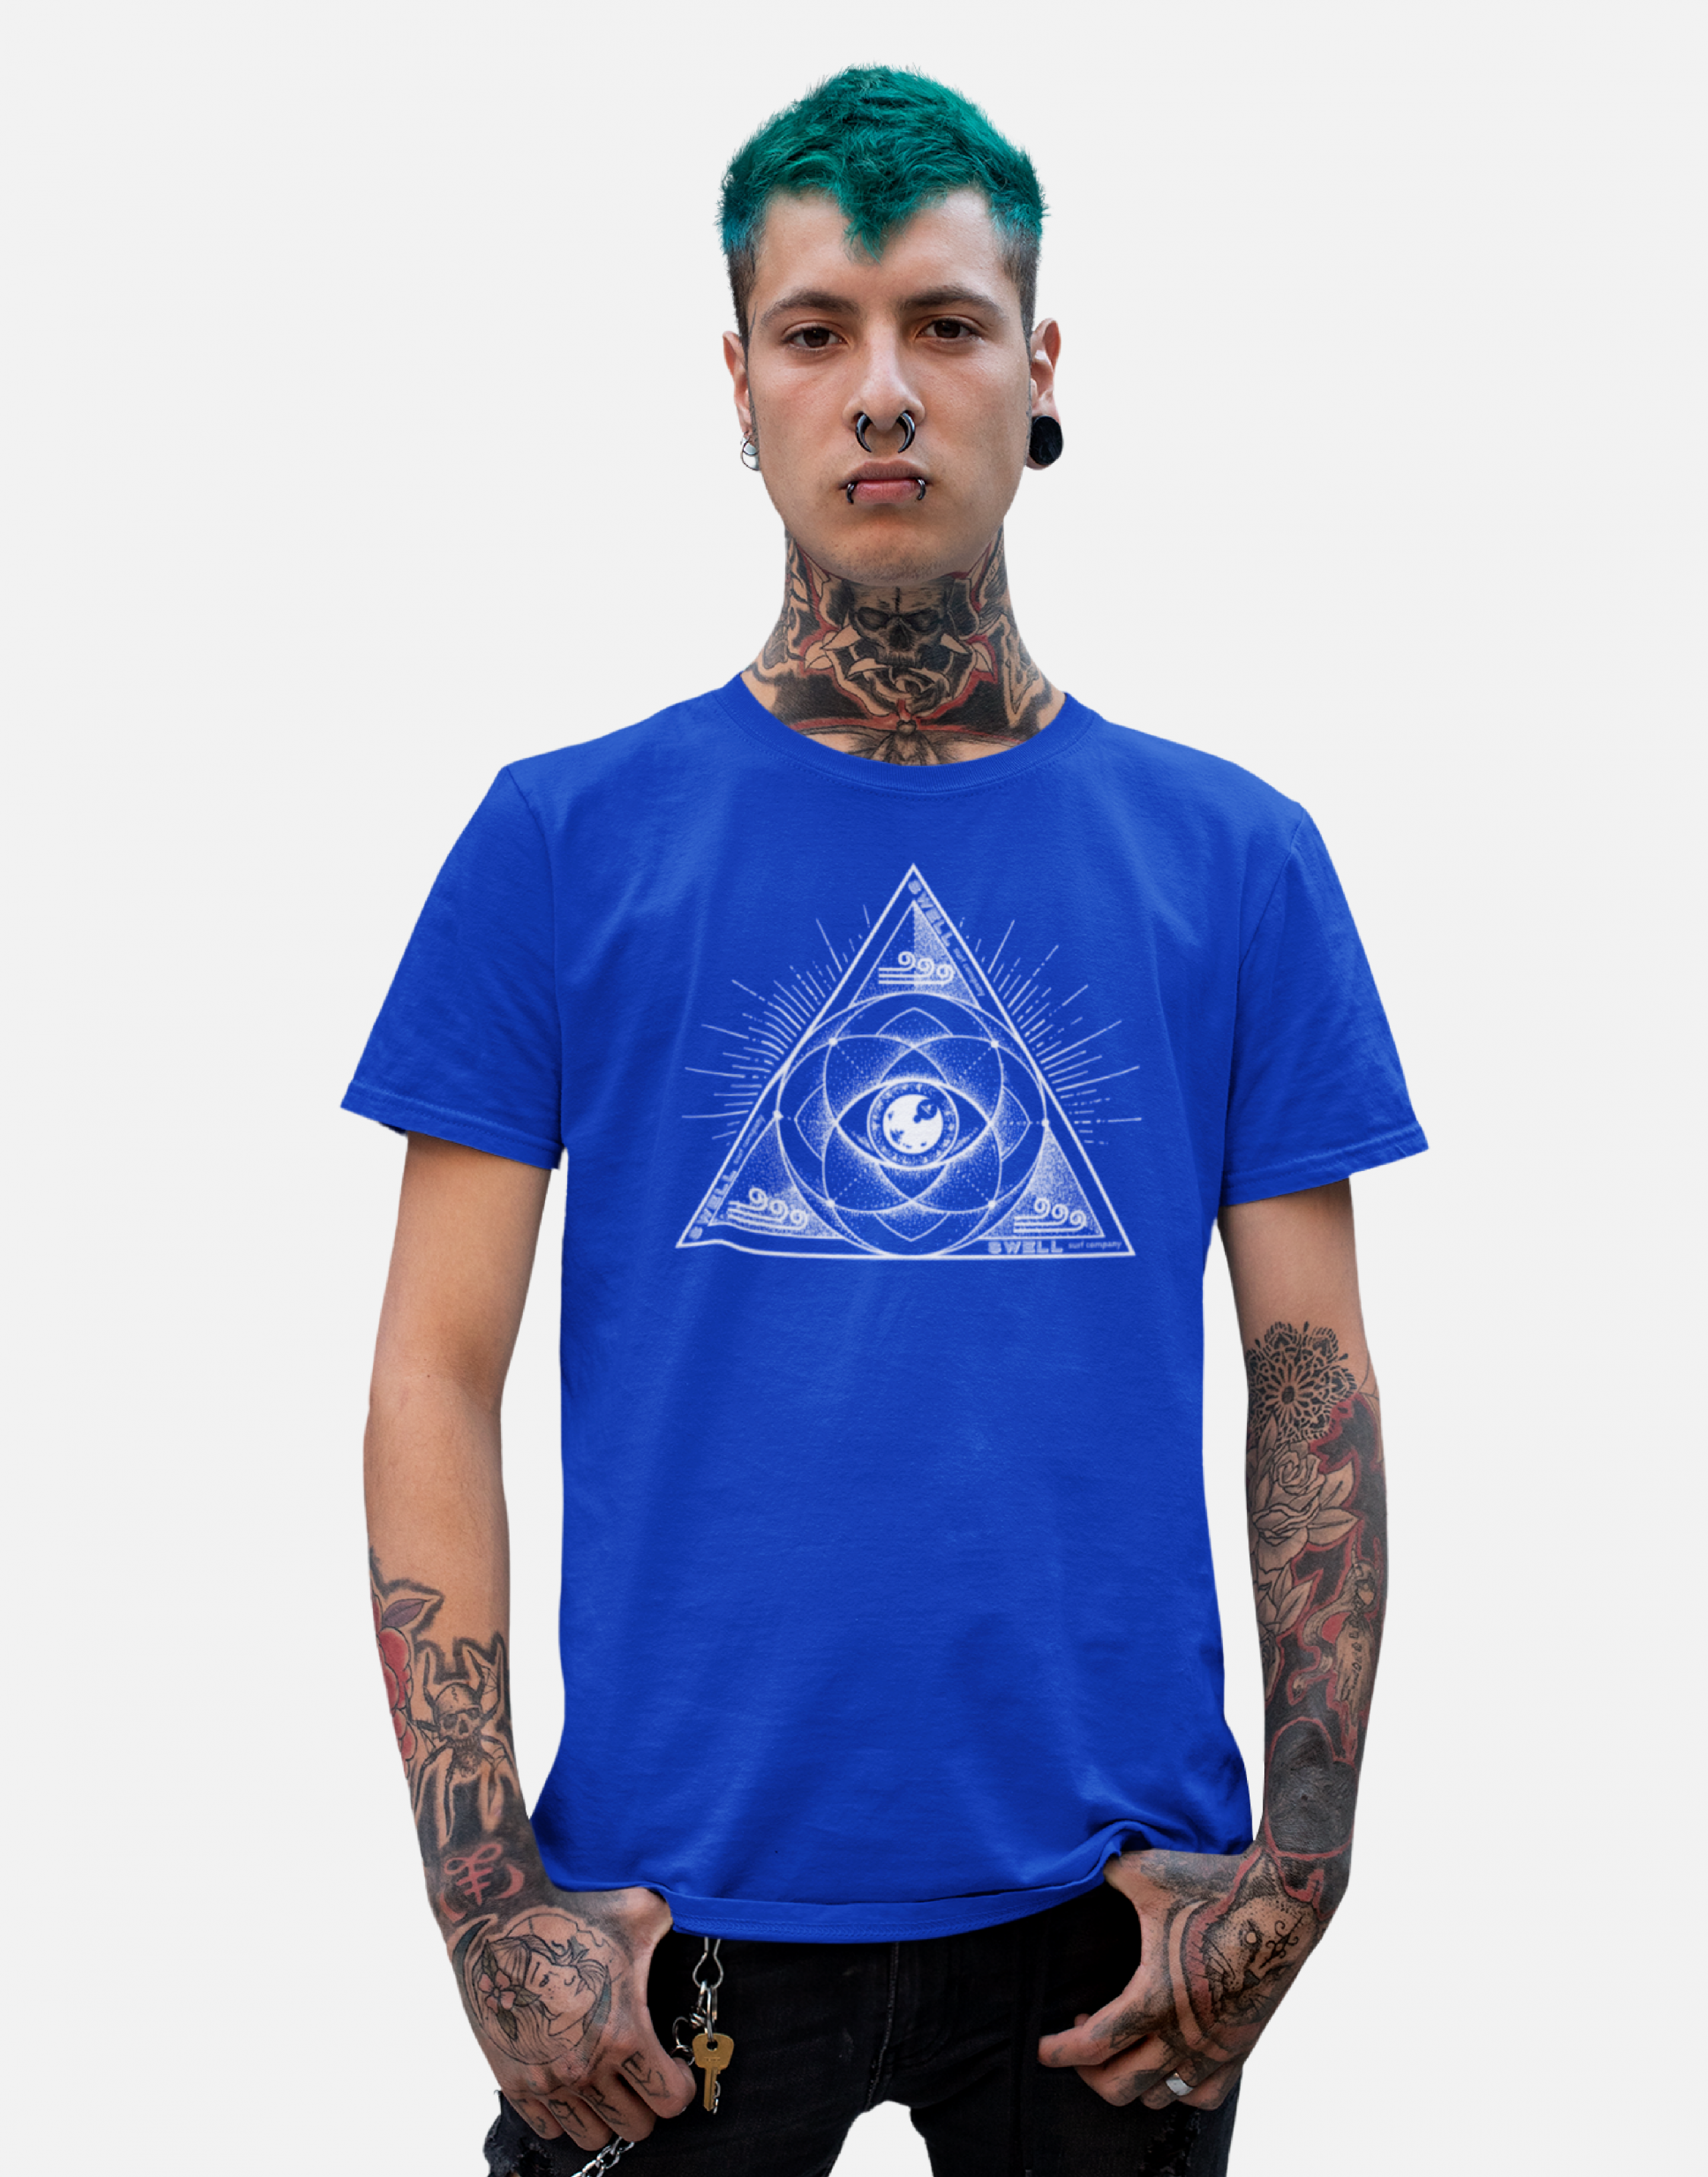 Man wearing a royal blue Swellone tshirt with triangle logo.